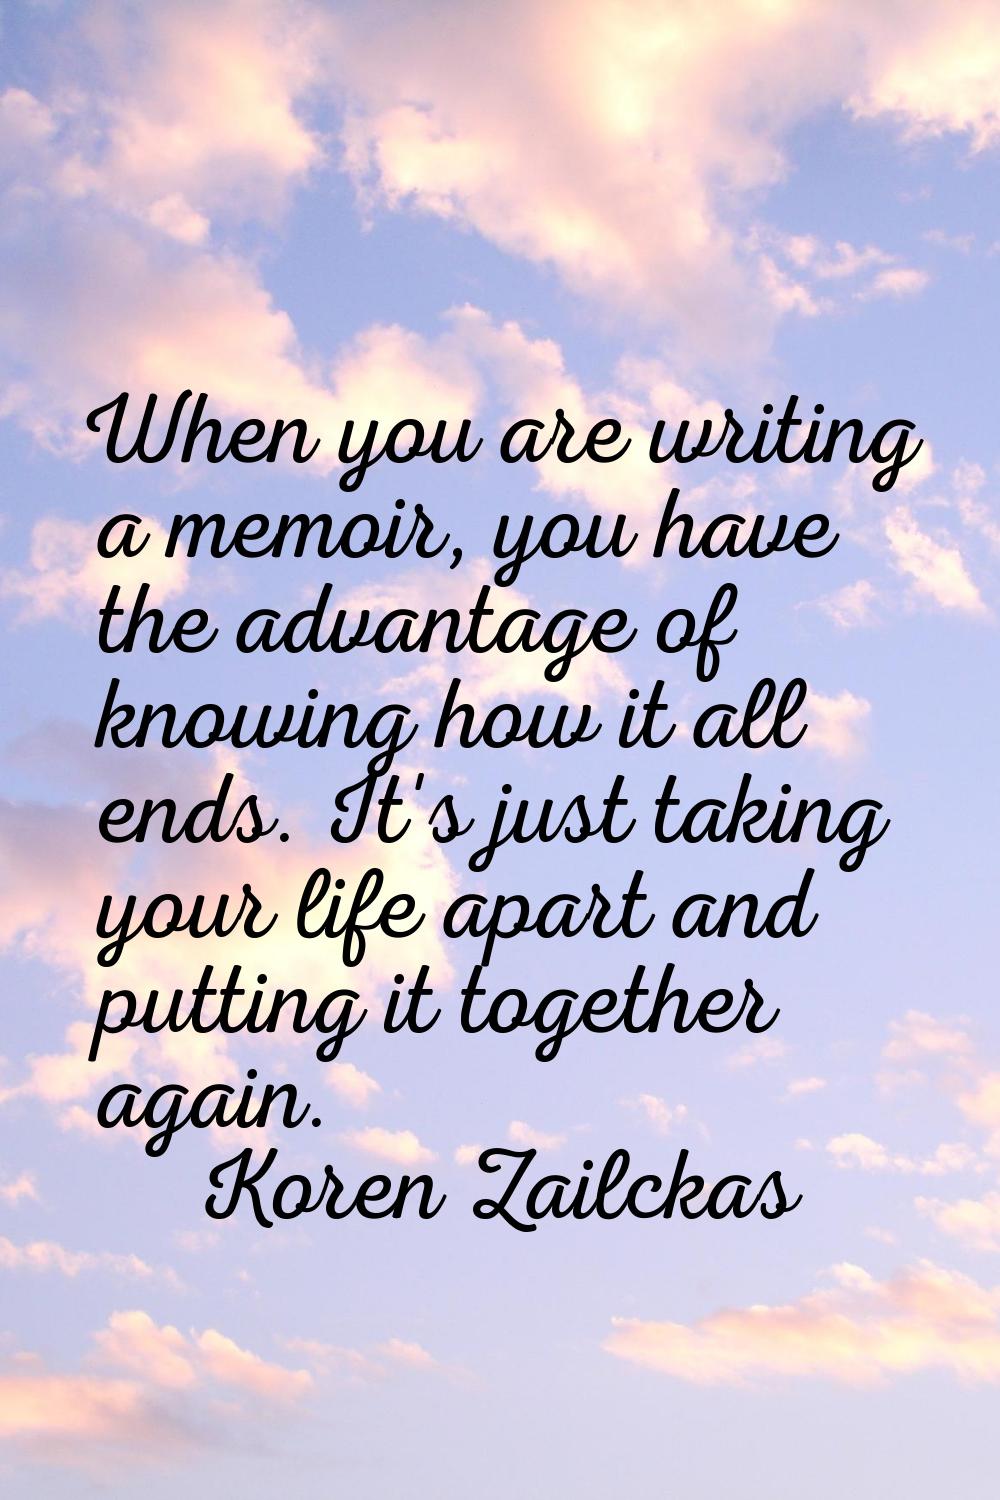 When you are writing a memoir, you have the advantage of knowing how it all ends. It's just taking 